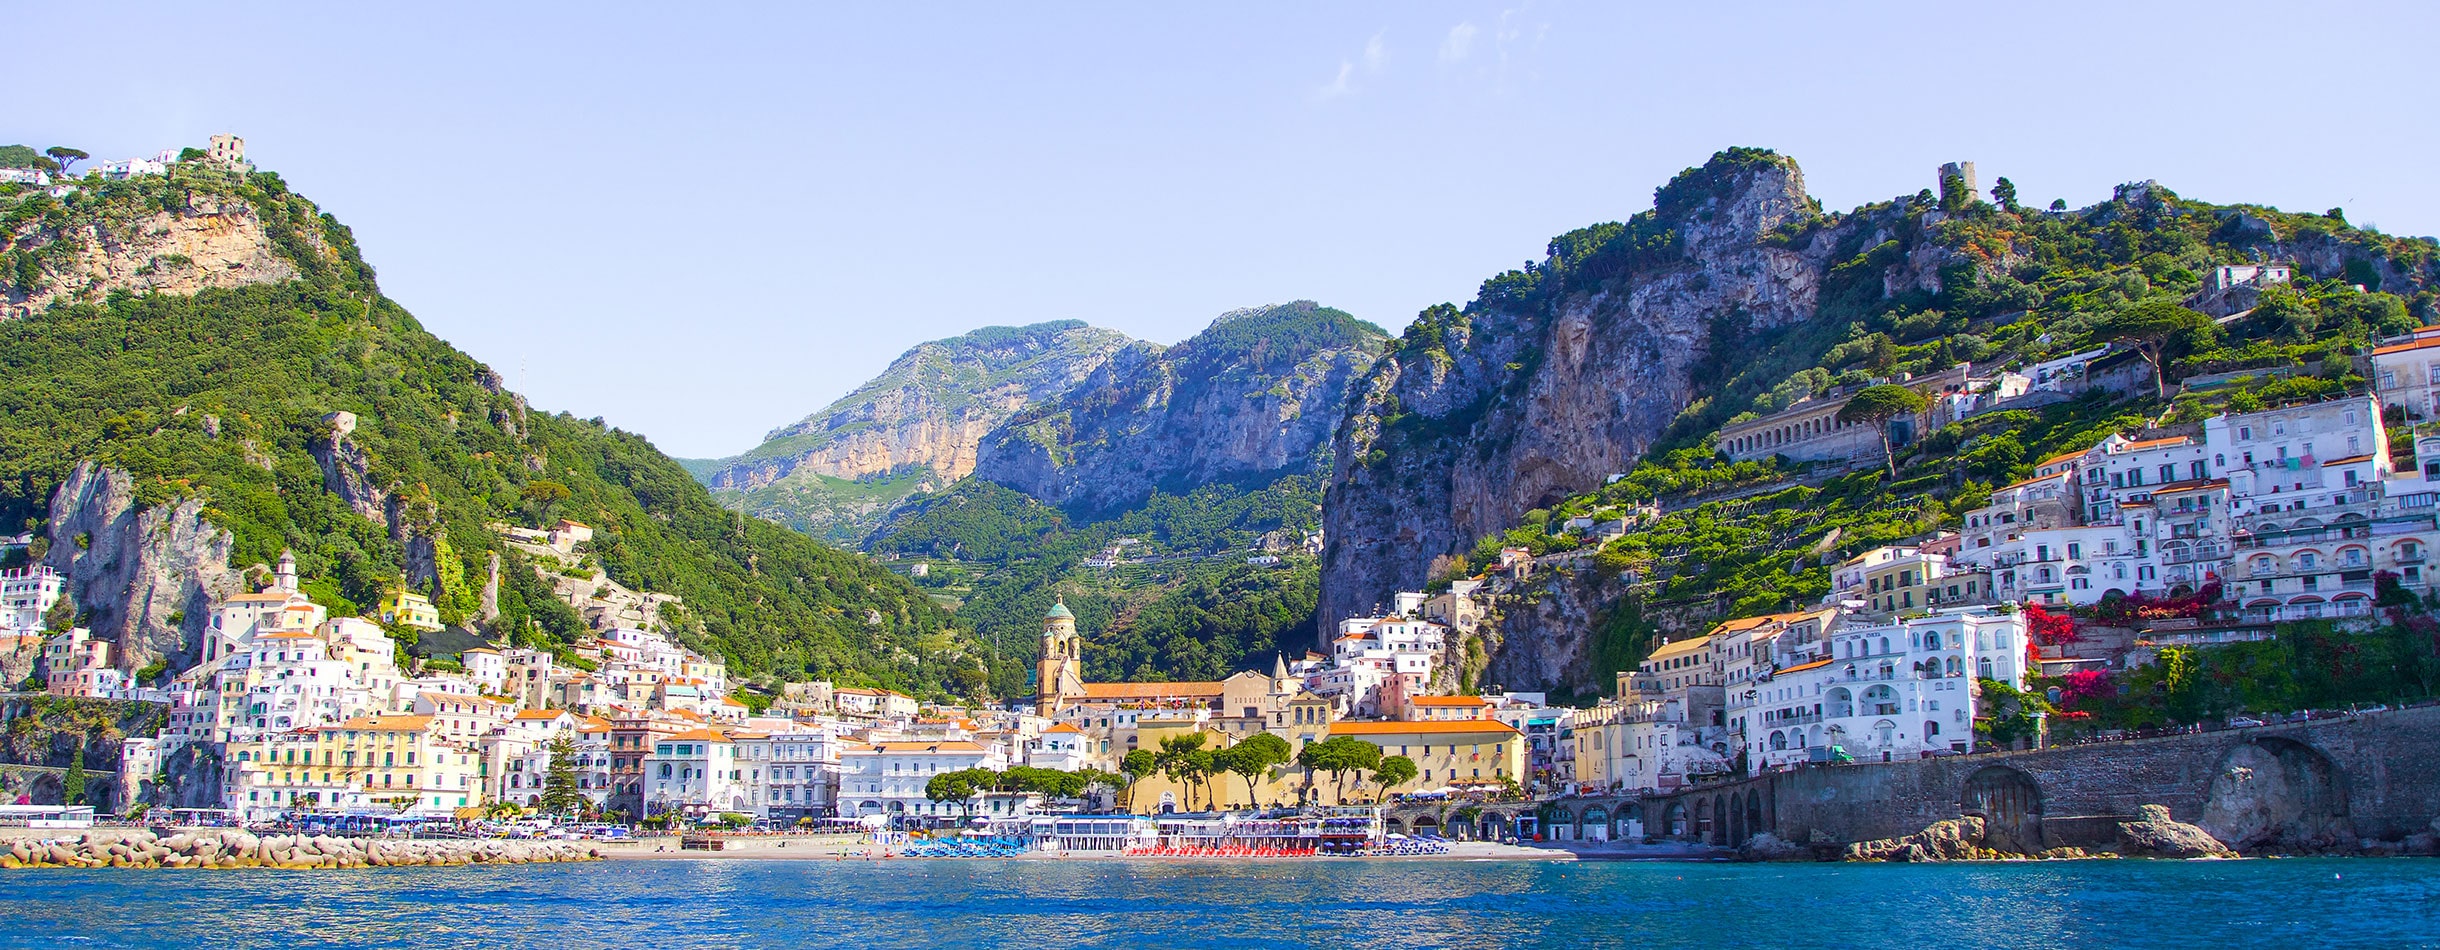 View from the sea on the cozy and cute town on the Amalfi Coast, Italy